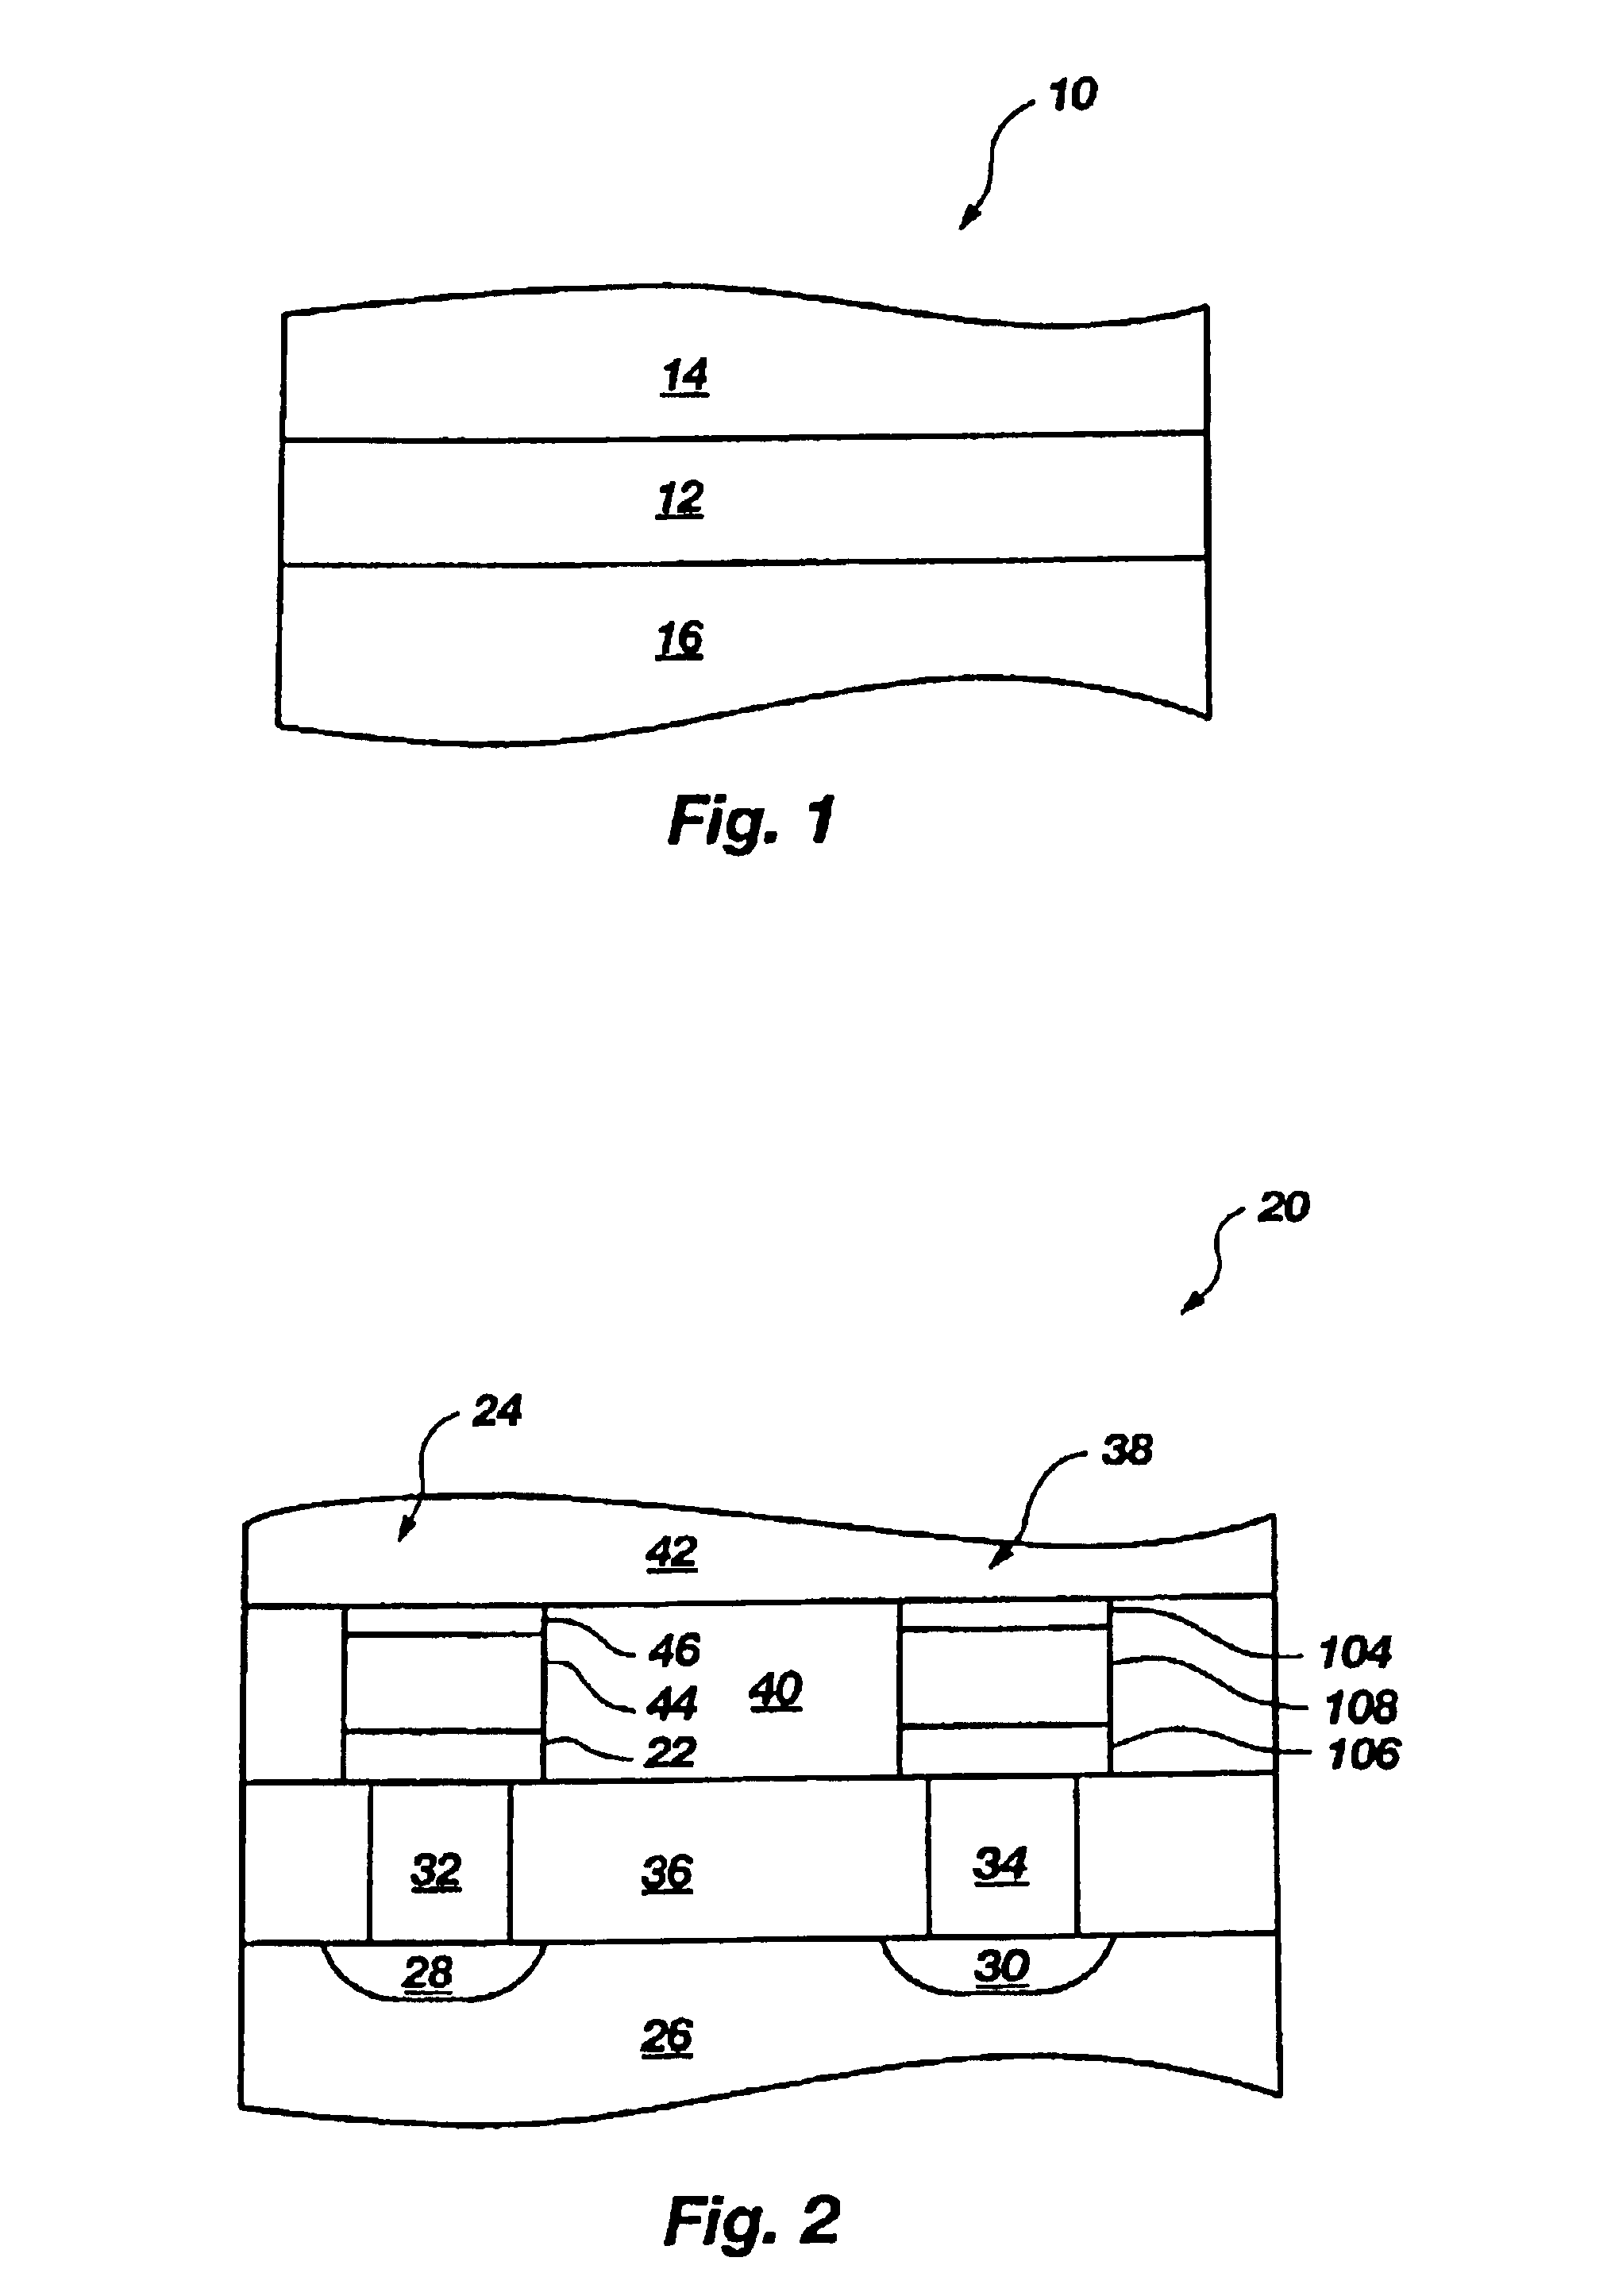 Method of using tantalum-aluminum-nitrogen material as diffusion barrier and adhesion layer in semiconductor devices